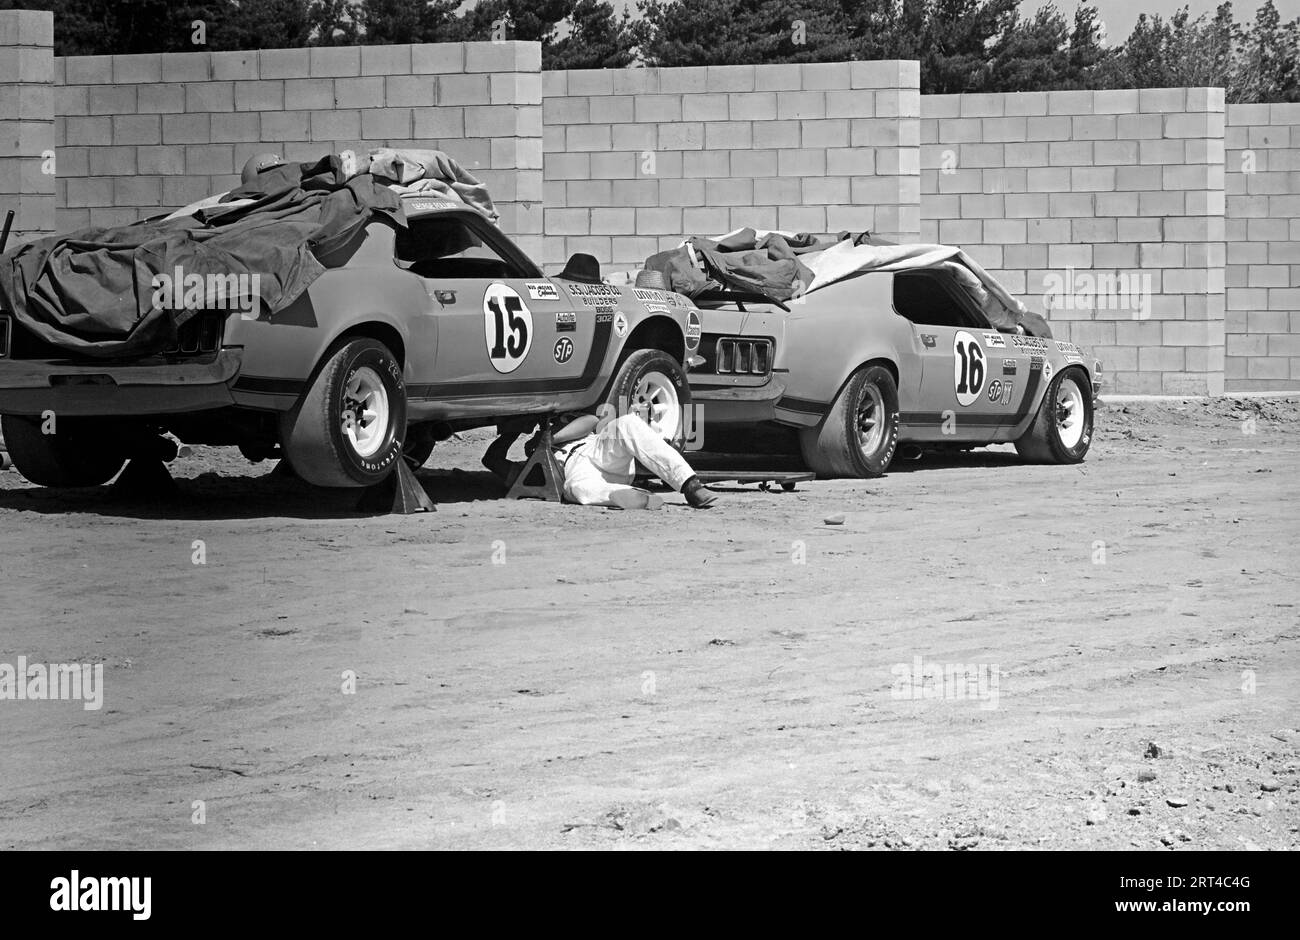 1971 Watkins Glen Trans Am,  Ford Mustang Boss 302,  #15 George Follmer Started 1st, Finished 2nd ,  #16 Peter Gregg Started 5th, Finished 3rd Stock Photo